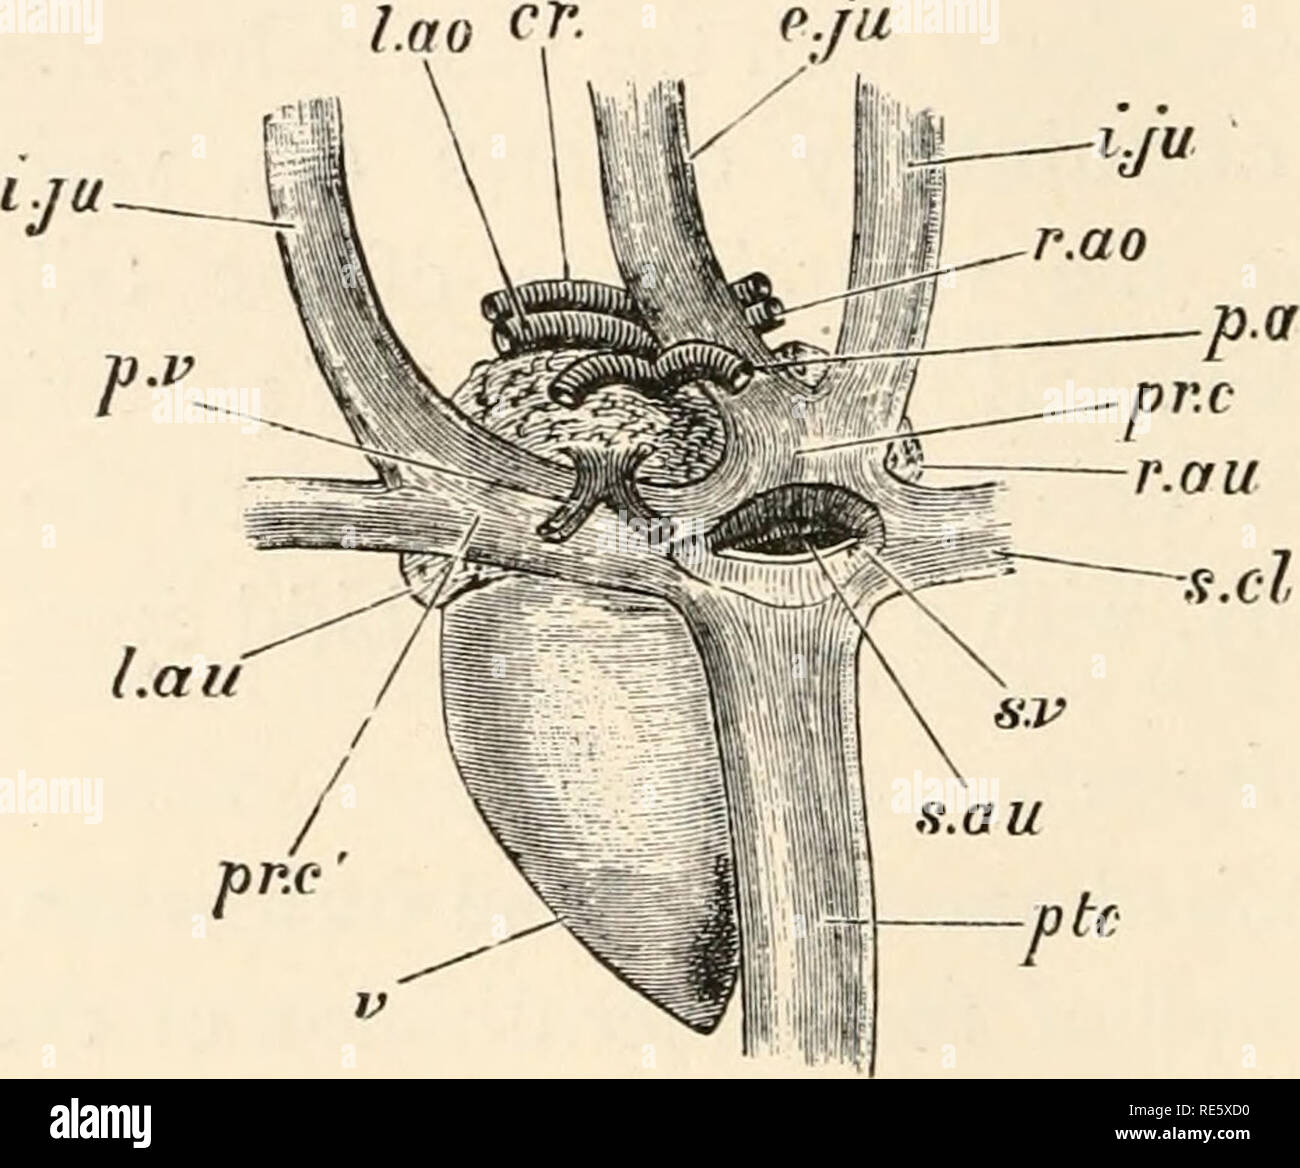 . A course of instruction in zootomy (vertebrata). Anatomy, Comparative. 172 ZOOTOMY. walled chambers, situated anterior to the ventricle, to the base of which they are united. 199. The three great arteries, springing from the base of the ventricle, and passing forwards between the auricles, closely bound together with connective tissue : when the latter is dissected away they are seen to have a twist to the left. Of the three, the pulmonary artery (Figs. 43 and 44, p.a], lying to the animal's left, and the left aorta (Lao) to the right, are situated ventrally at their origin, while the right  Stock Photo